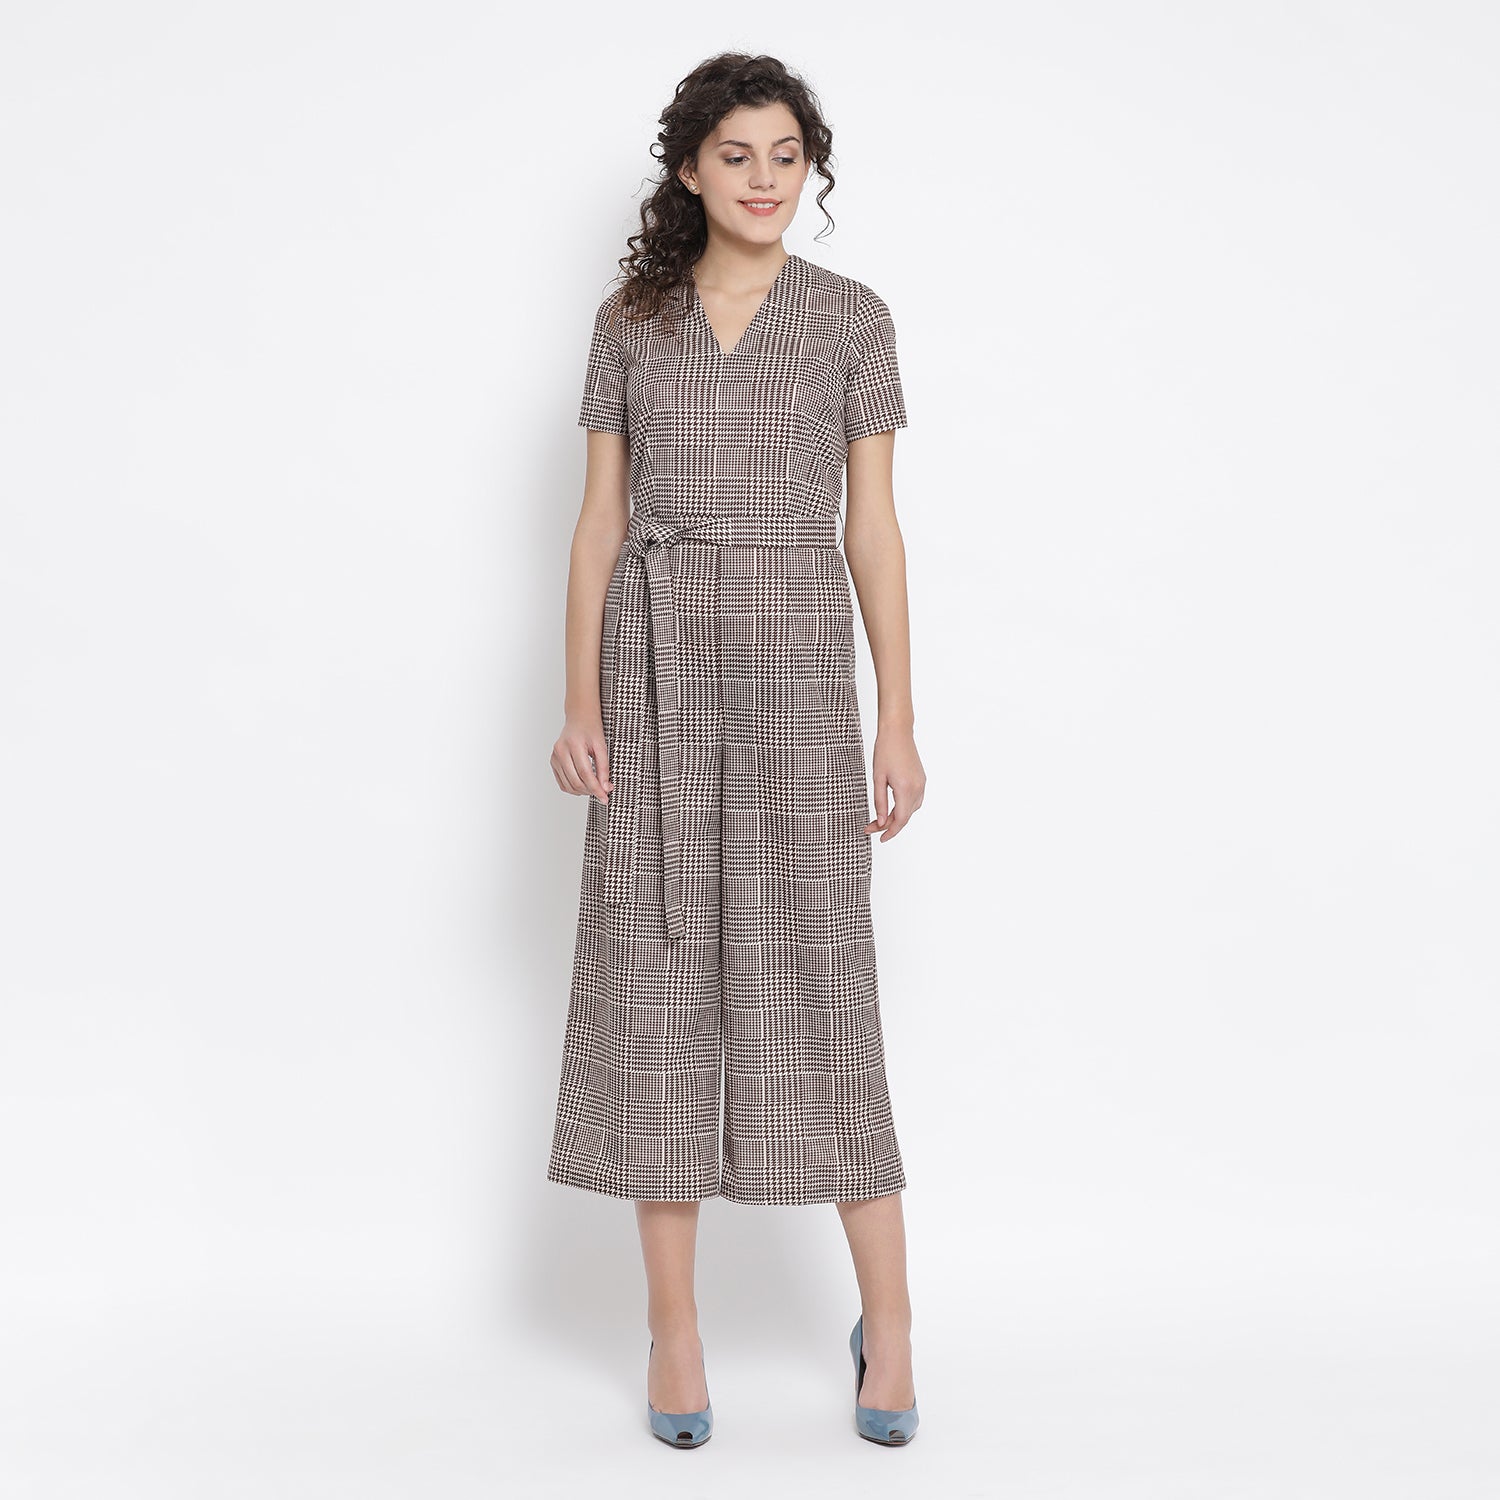 Brown Check Jumpsuit With Belt Knot